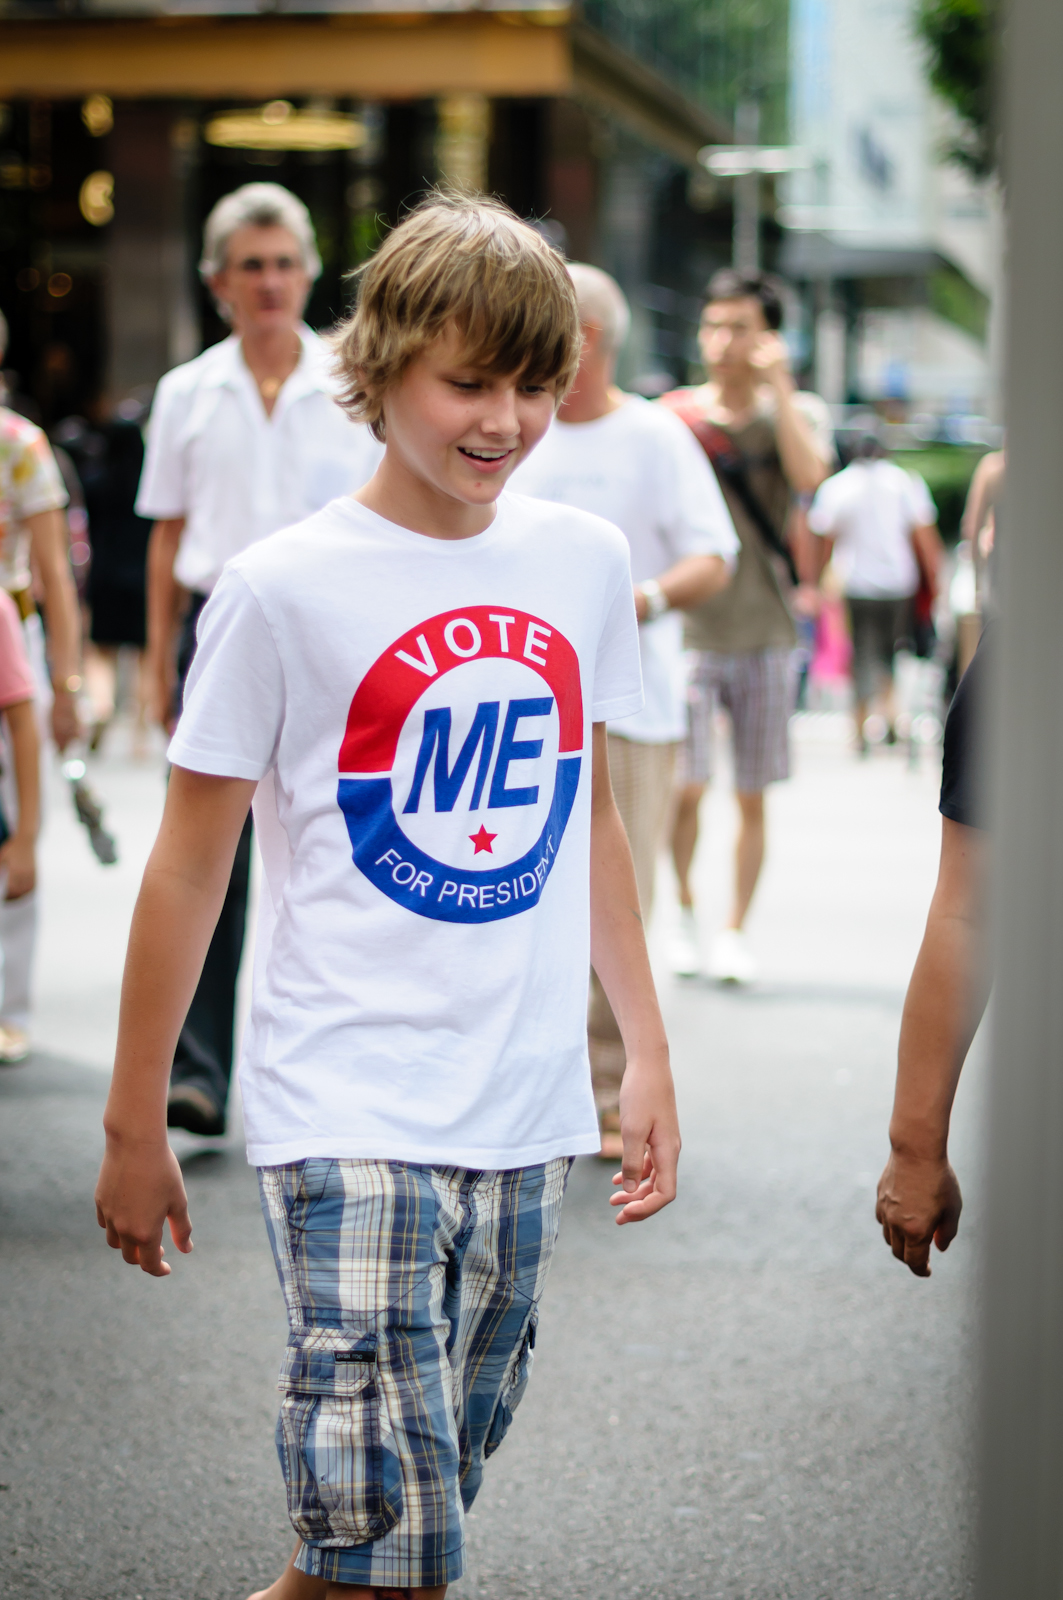 Street photography - boy wearing t-shirt that says vote me for president